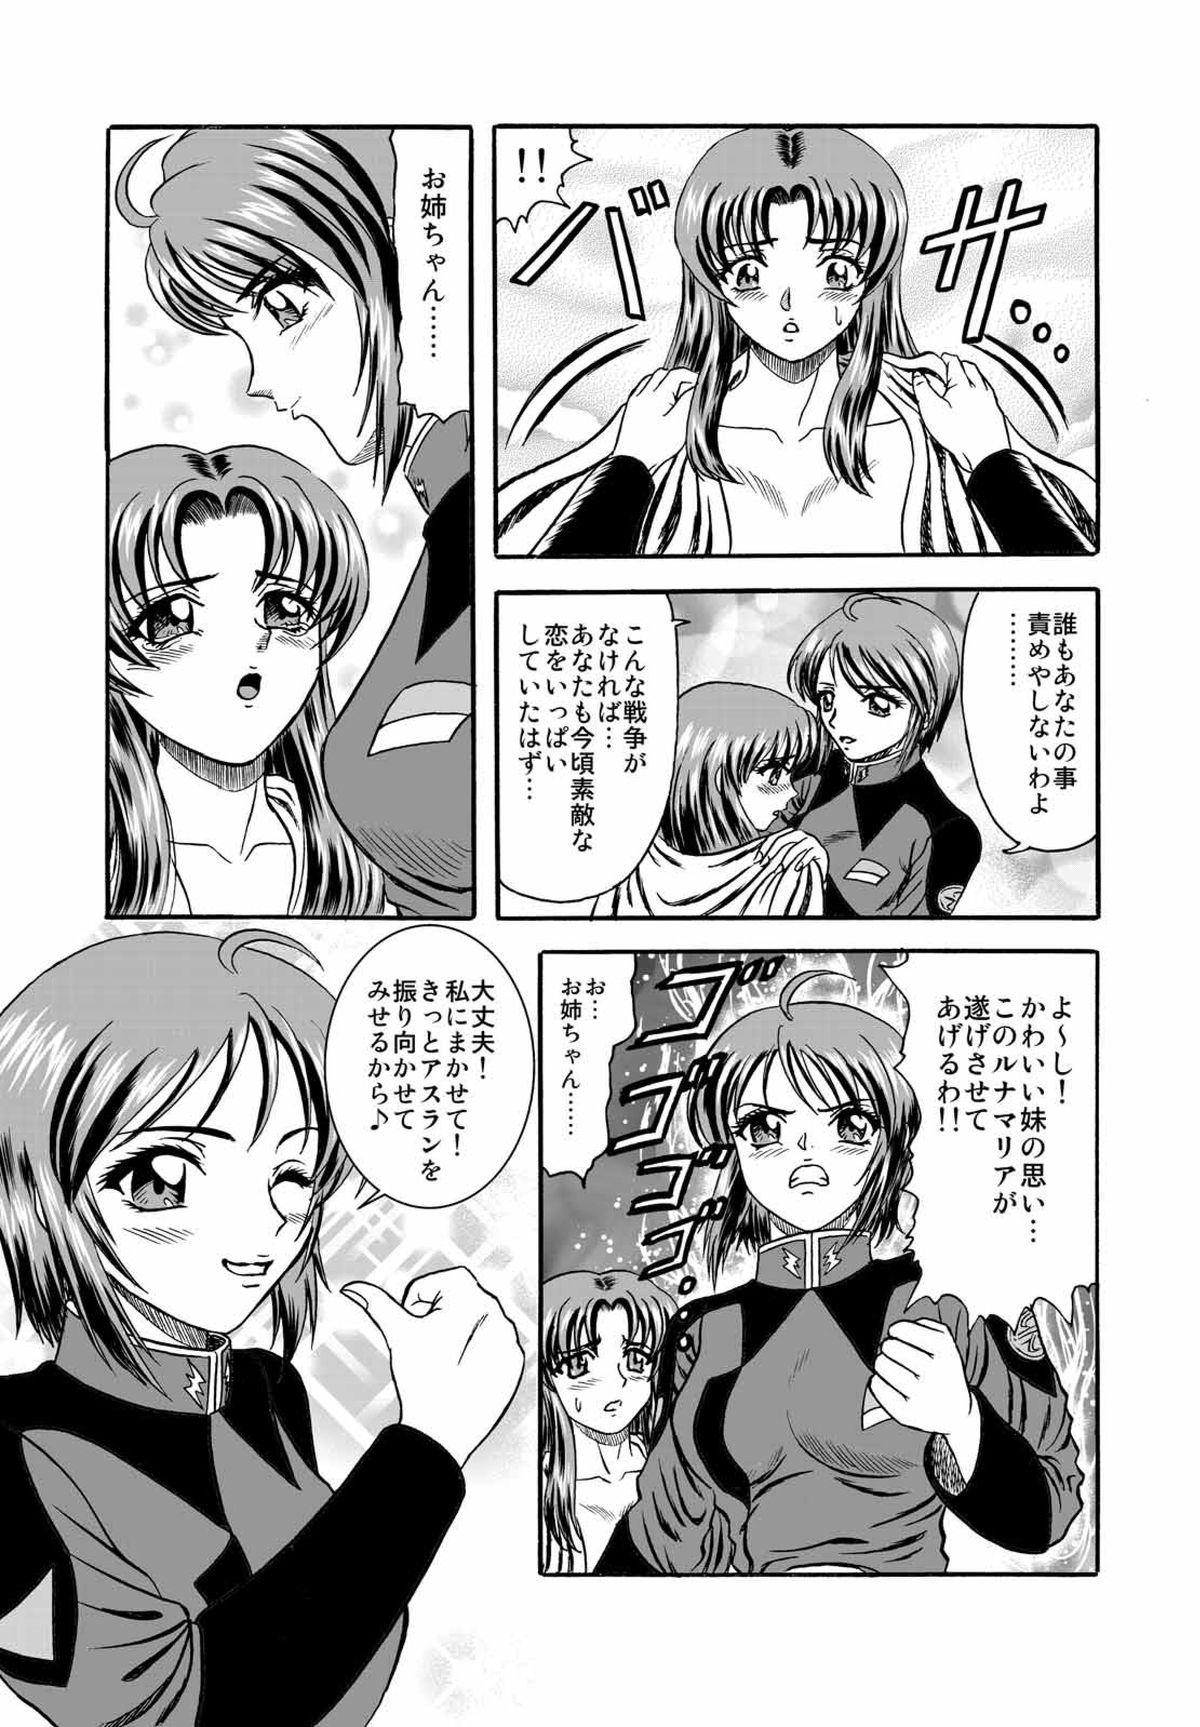 Soloboy Pair.Love.Game - Gundam seed destiny Lolicon - Page 7